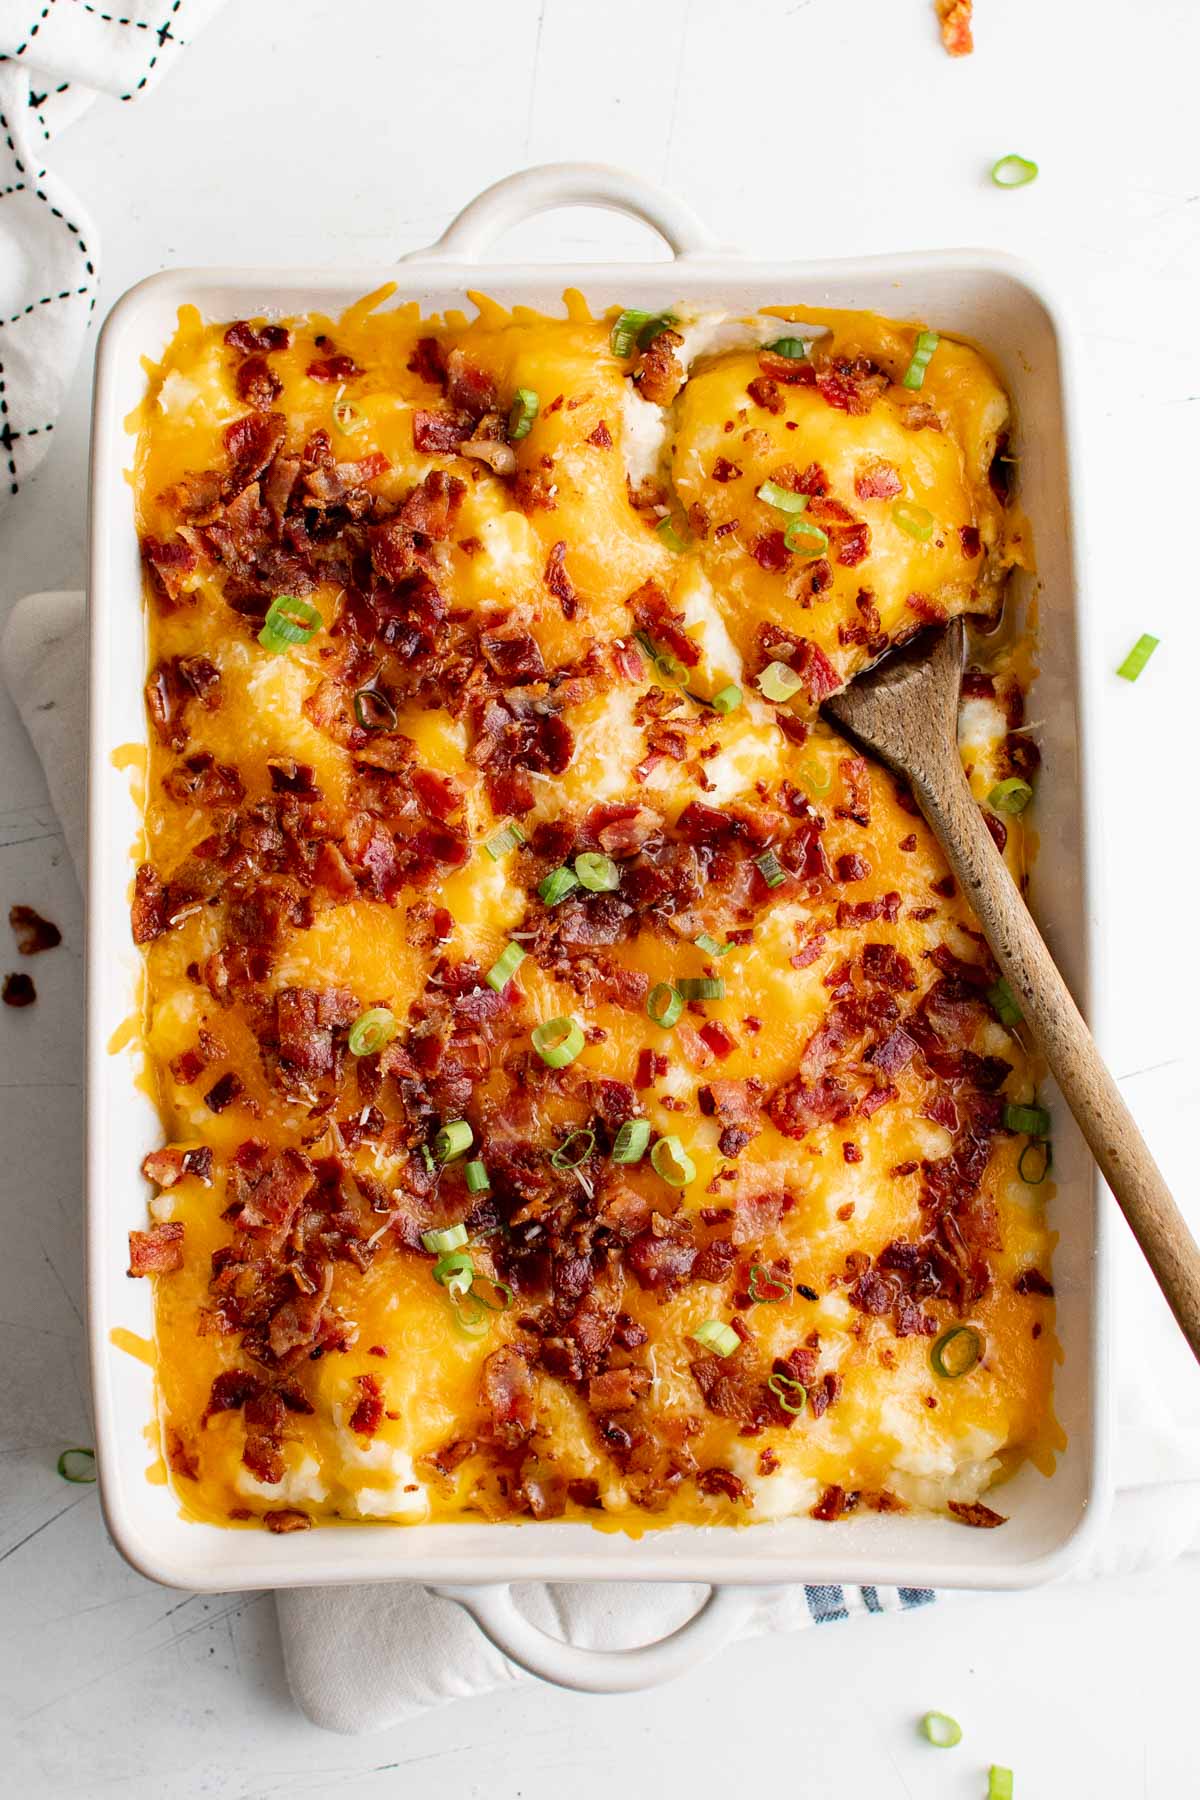 Casserole dish with mashed potatoes loaded with bacon and cheese.